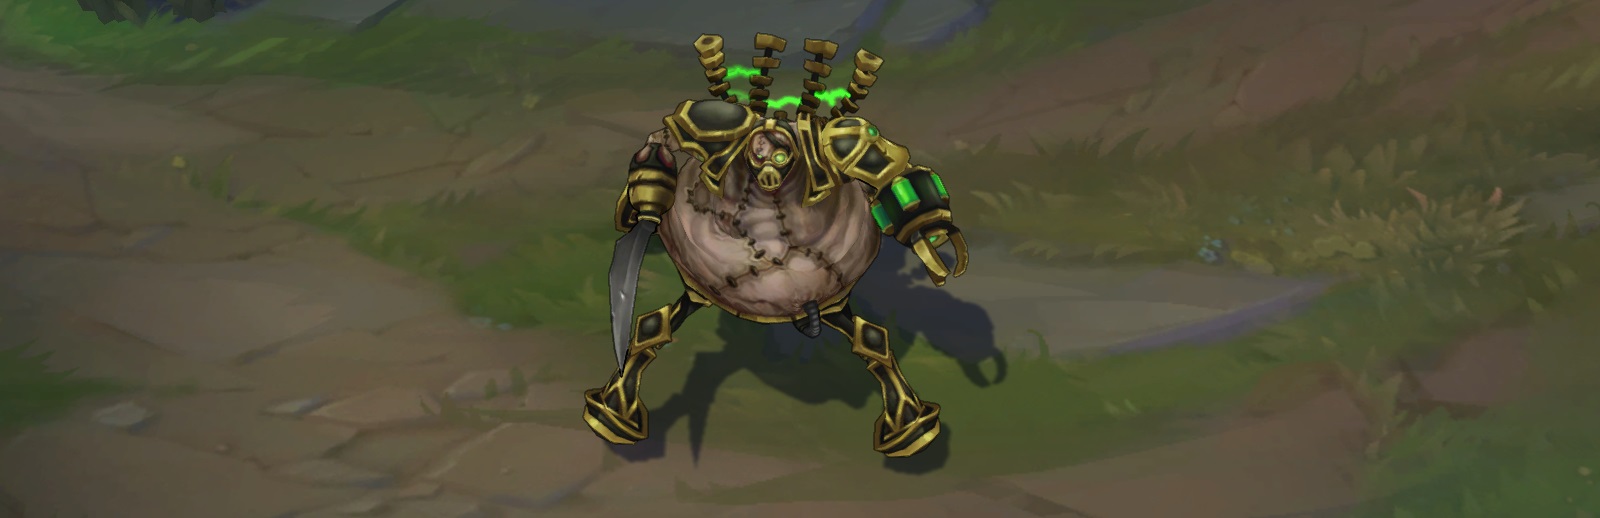 Now Here’s A Great Idea For A League Of Legends Skin